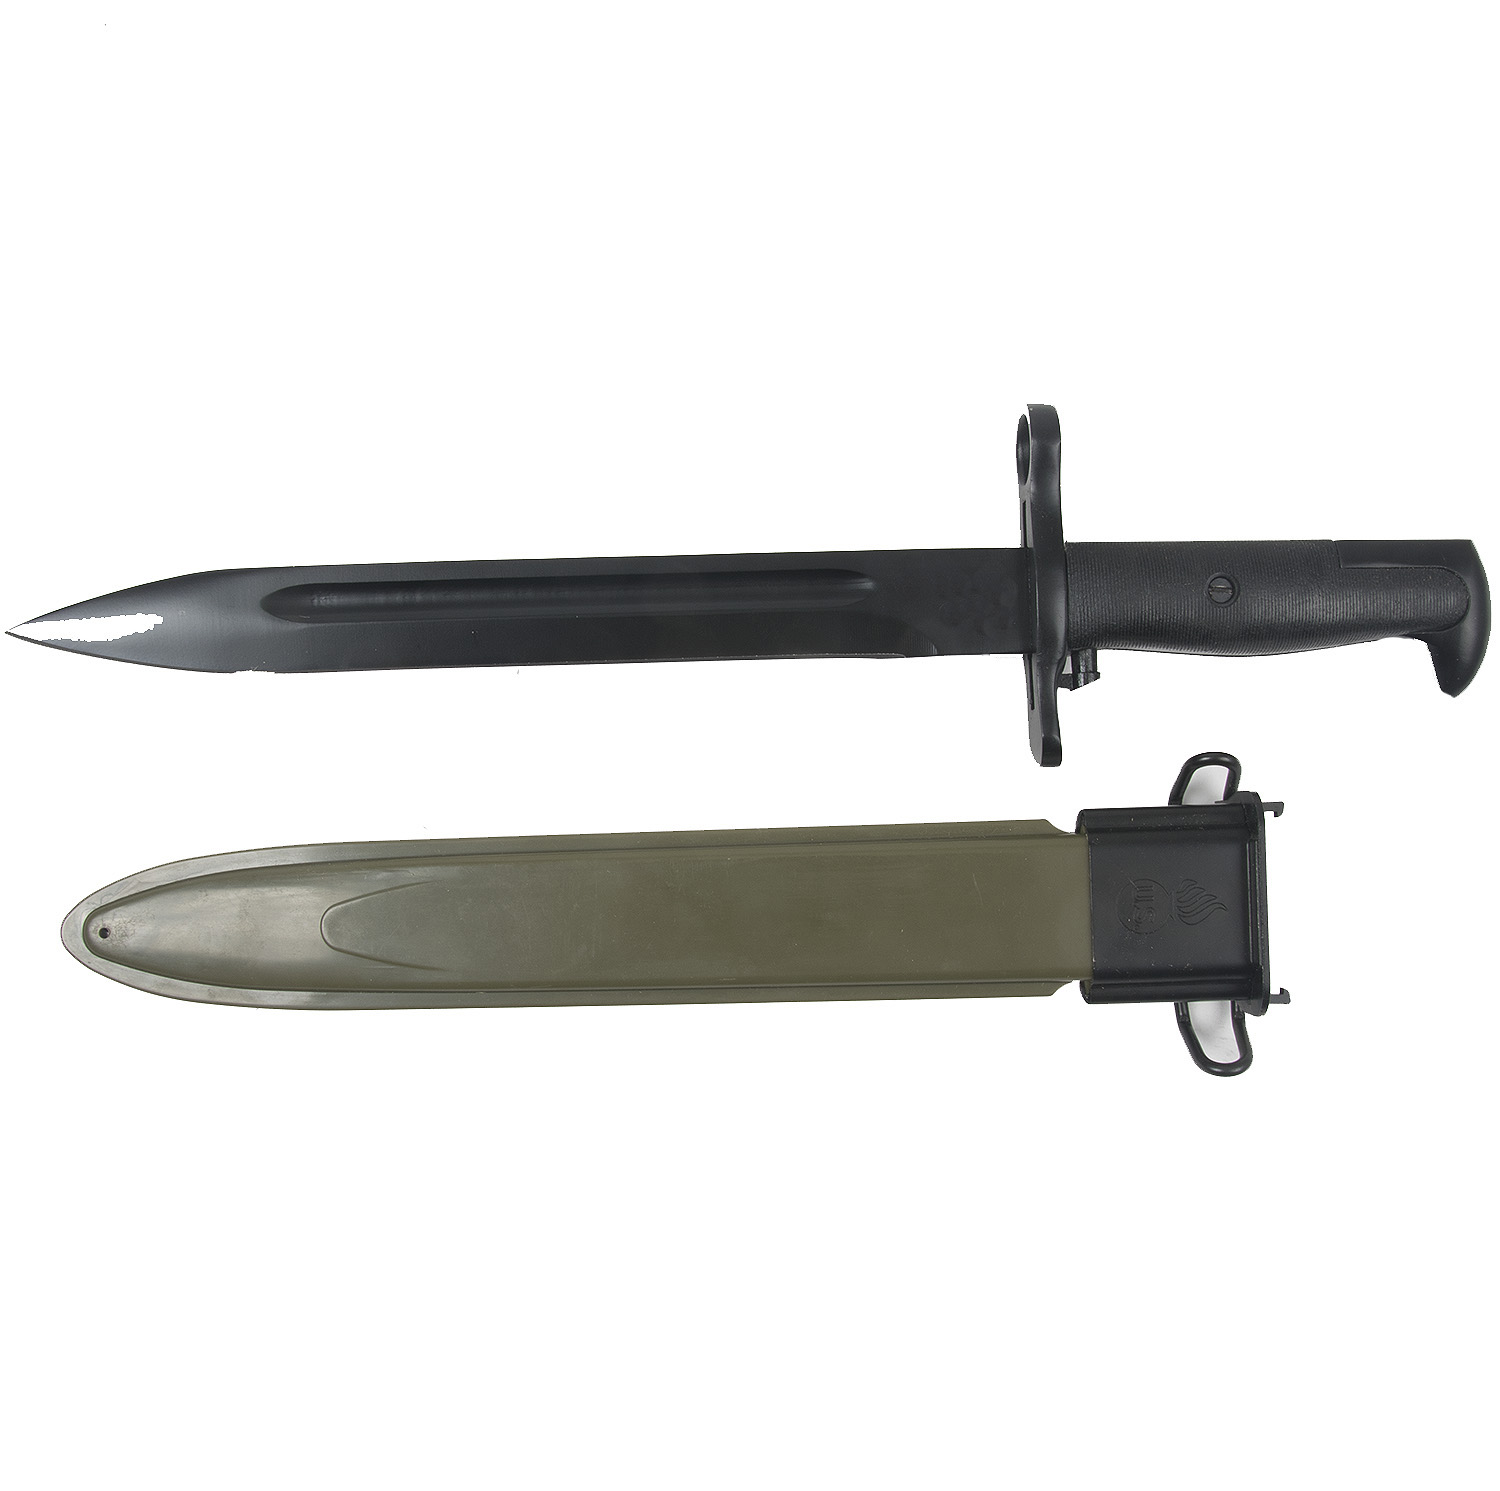 M1 bayonet and M3 Scabbard issued to US soldiers and Marines equipped with M...